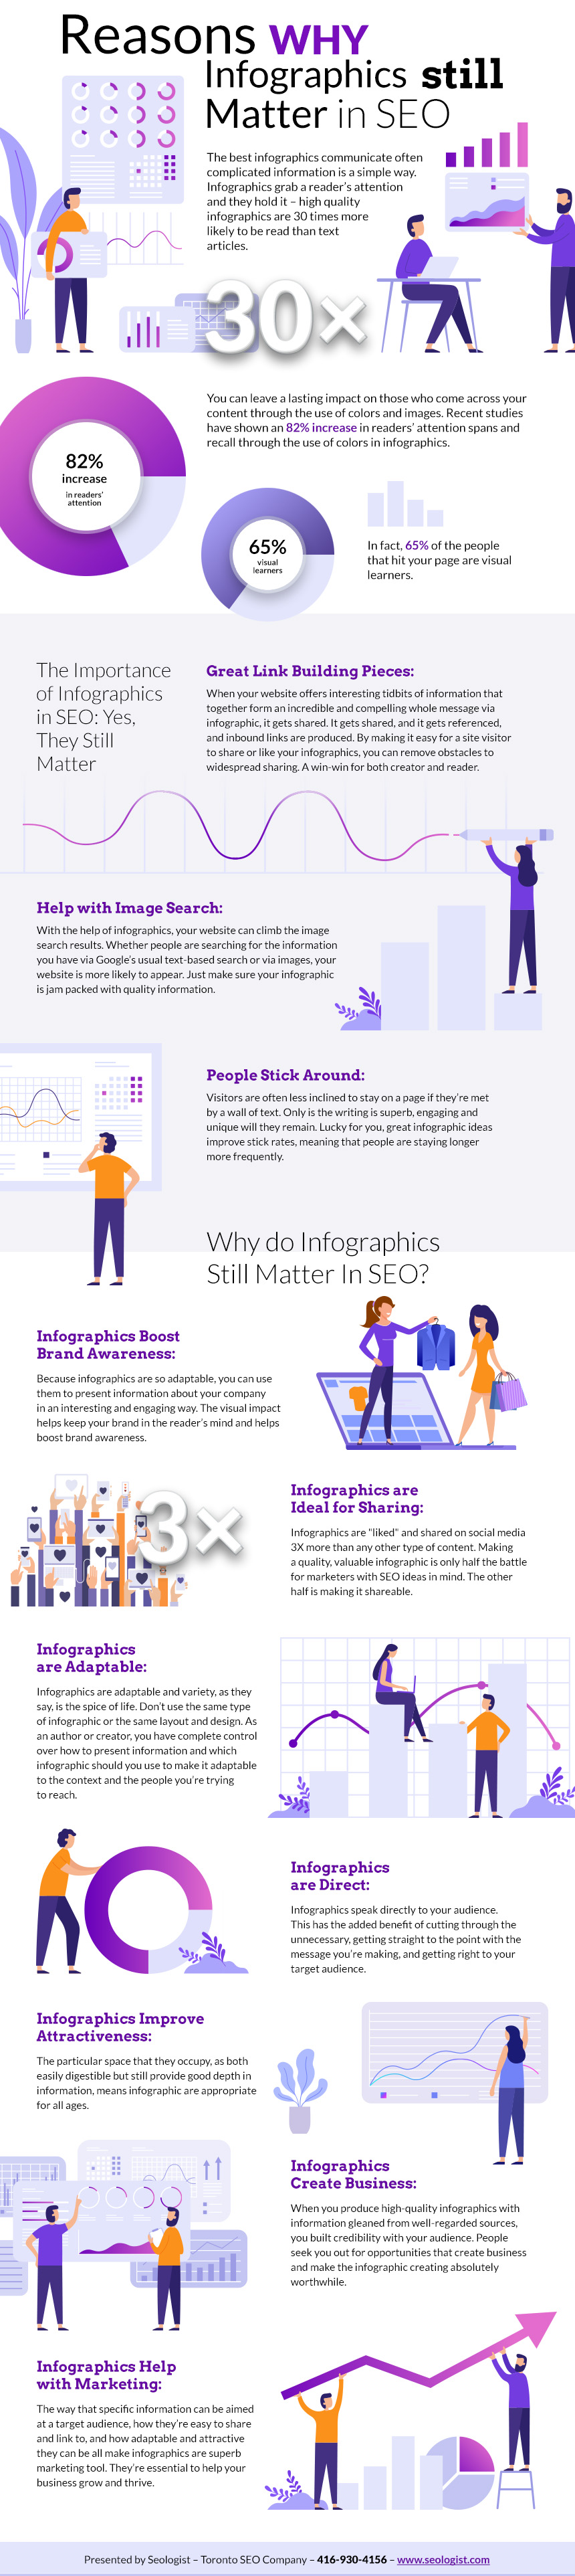 Reasons Why Infographics Still Matter in SEO